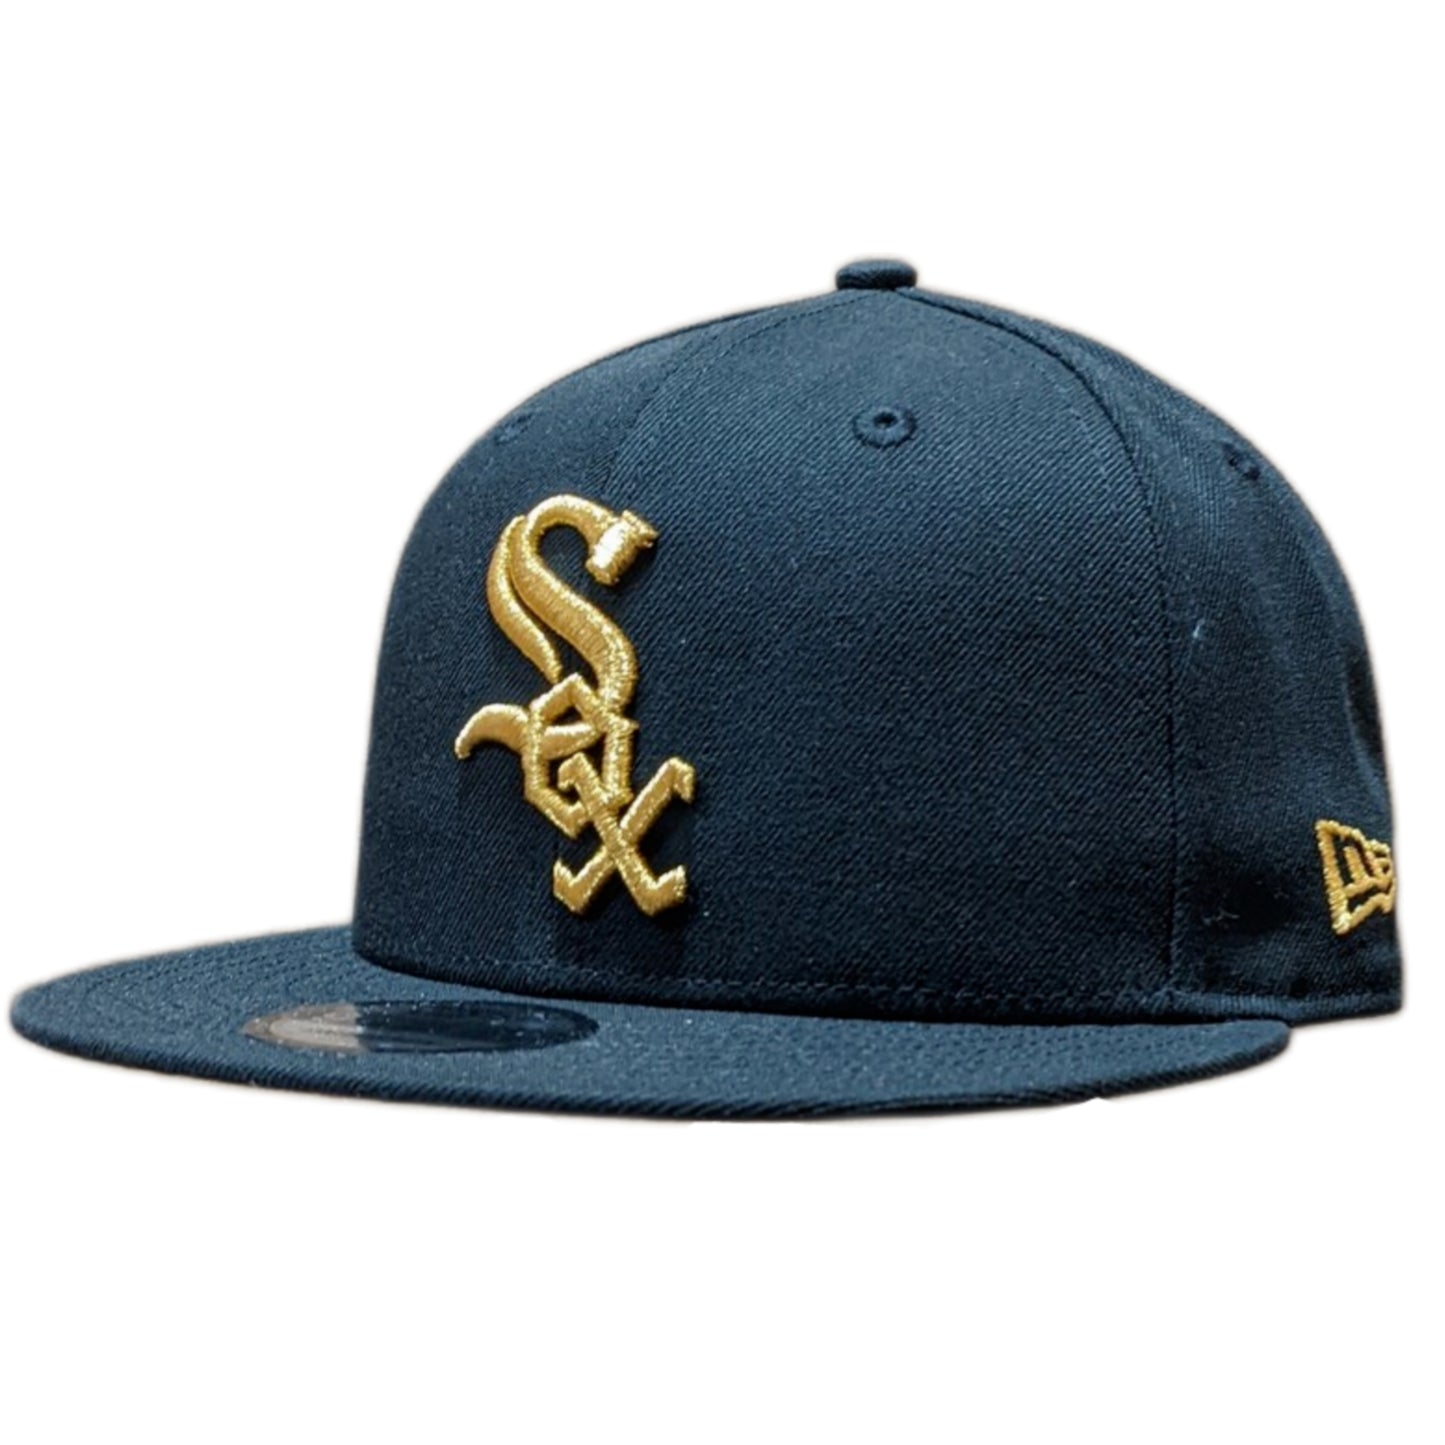 Mens Chicago White Sox New Era Black Gold Rush Cooperstown Collection Black and Gold 9FIFTY Snapback Hat